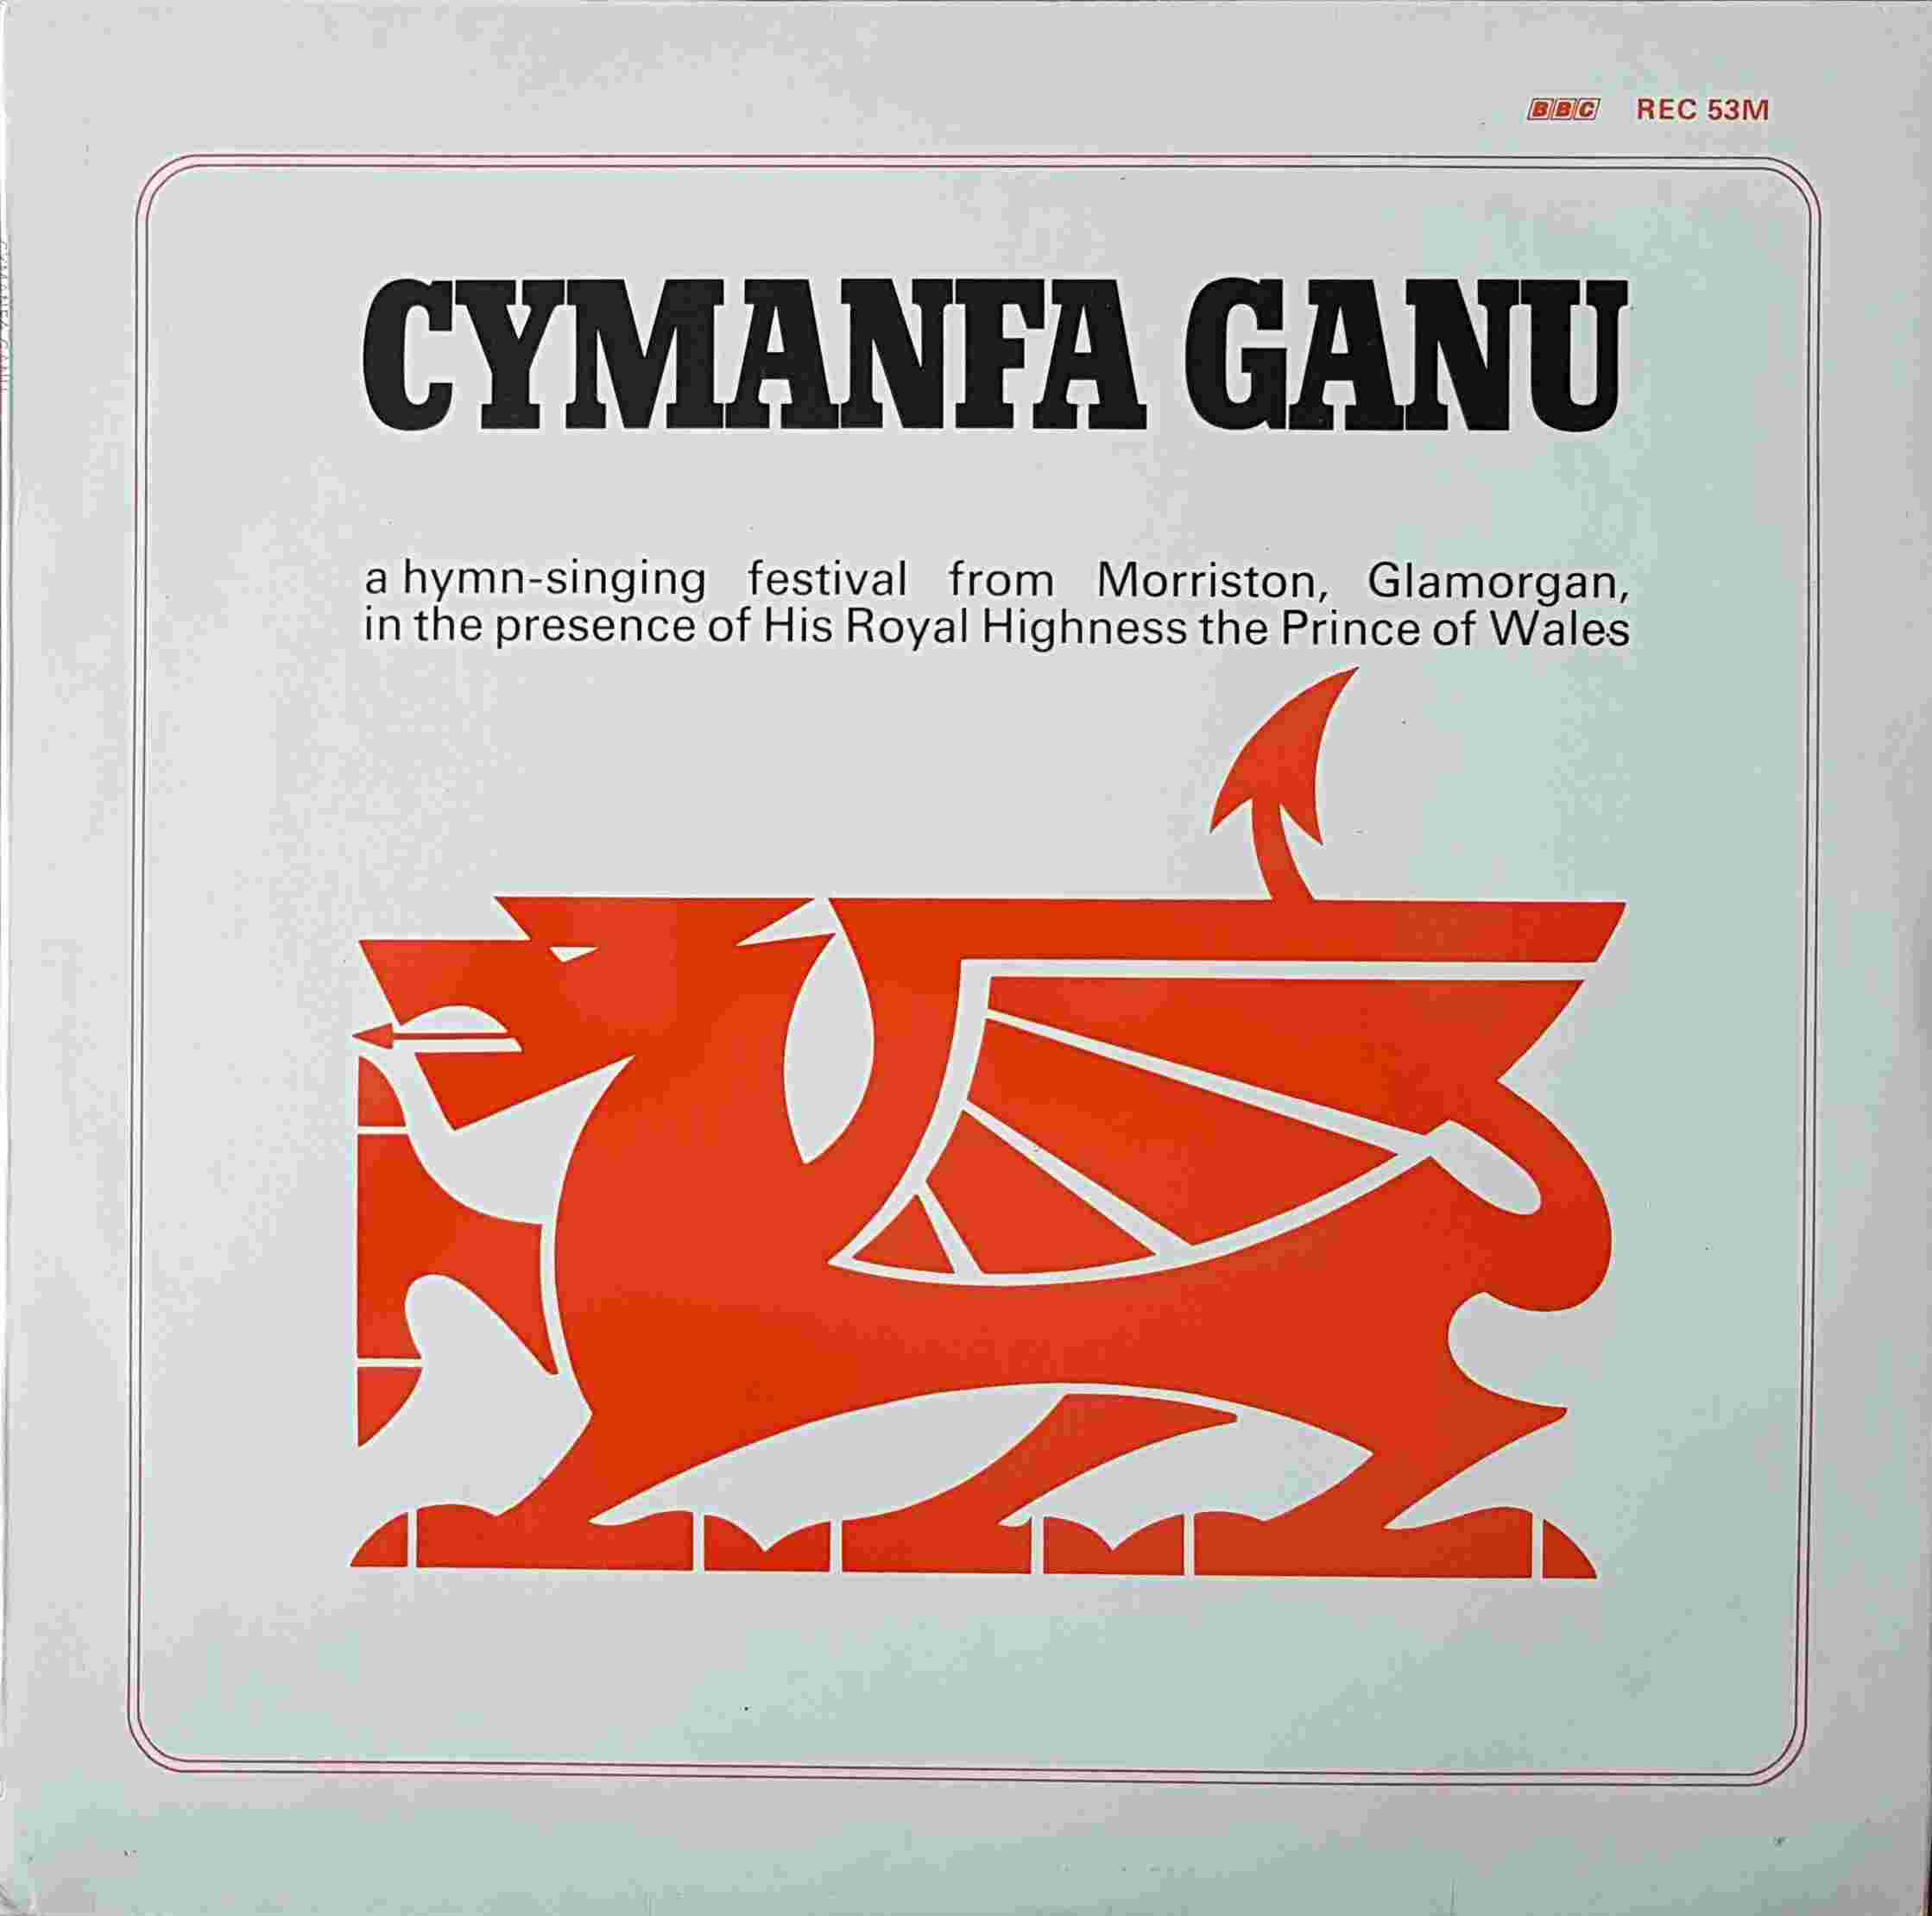 Picture of REC 53 Cymanra Ganu 1969 by artist Various from the BBC albums - Records and Tapes library